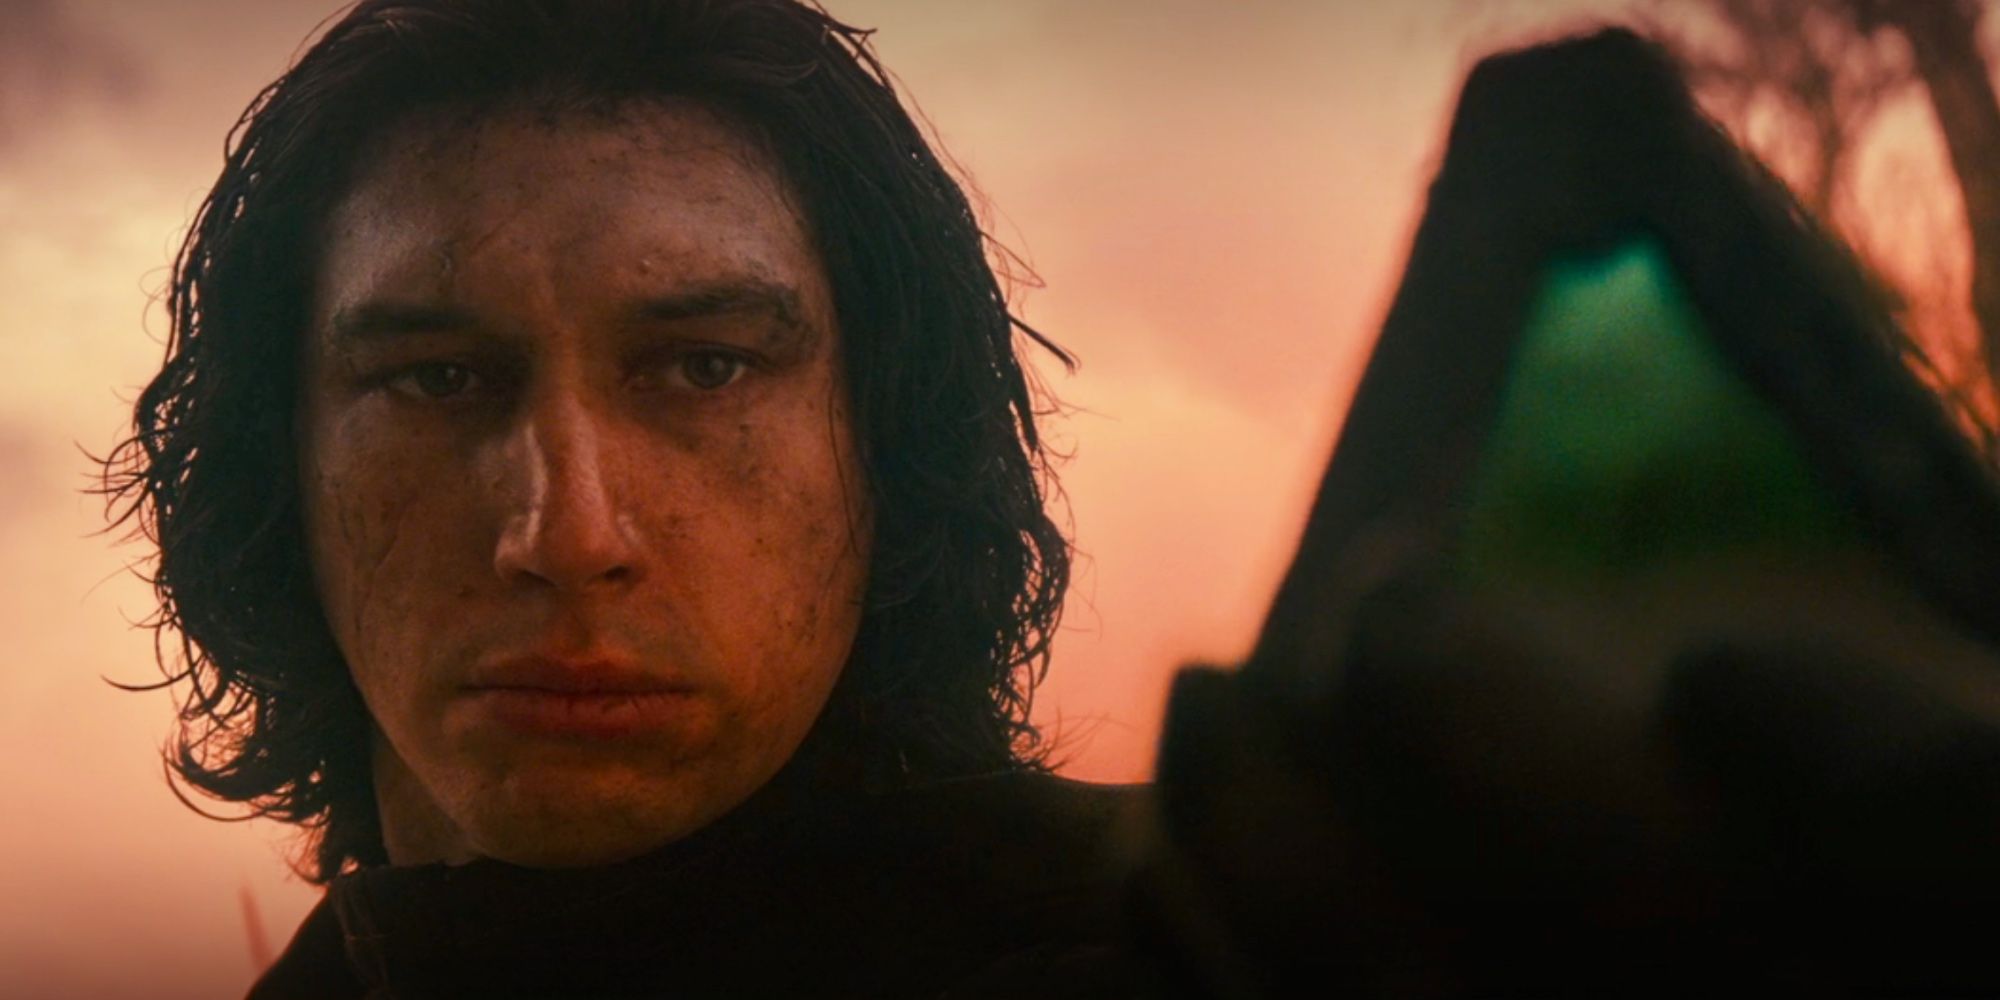 Kylo Ren At Ruins Of Vaders Castle